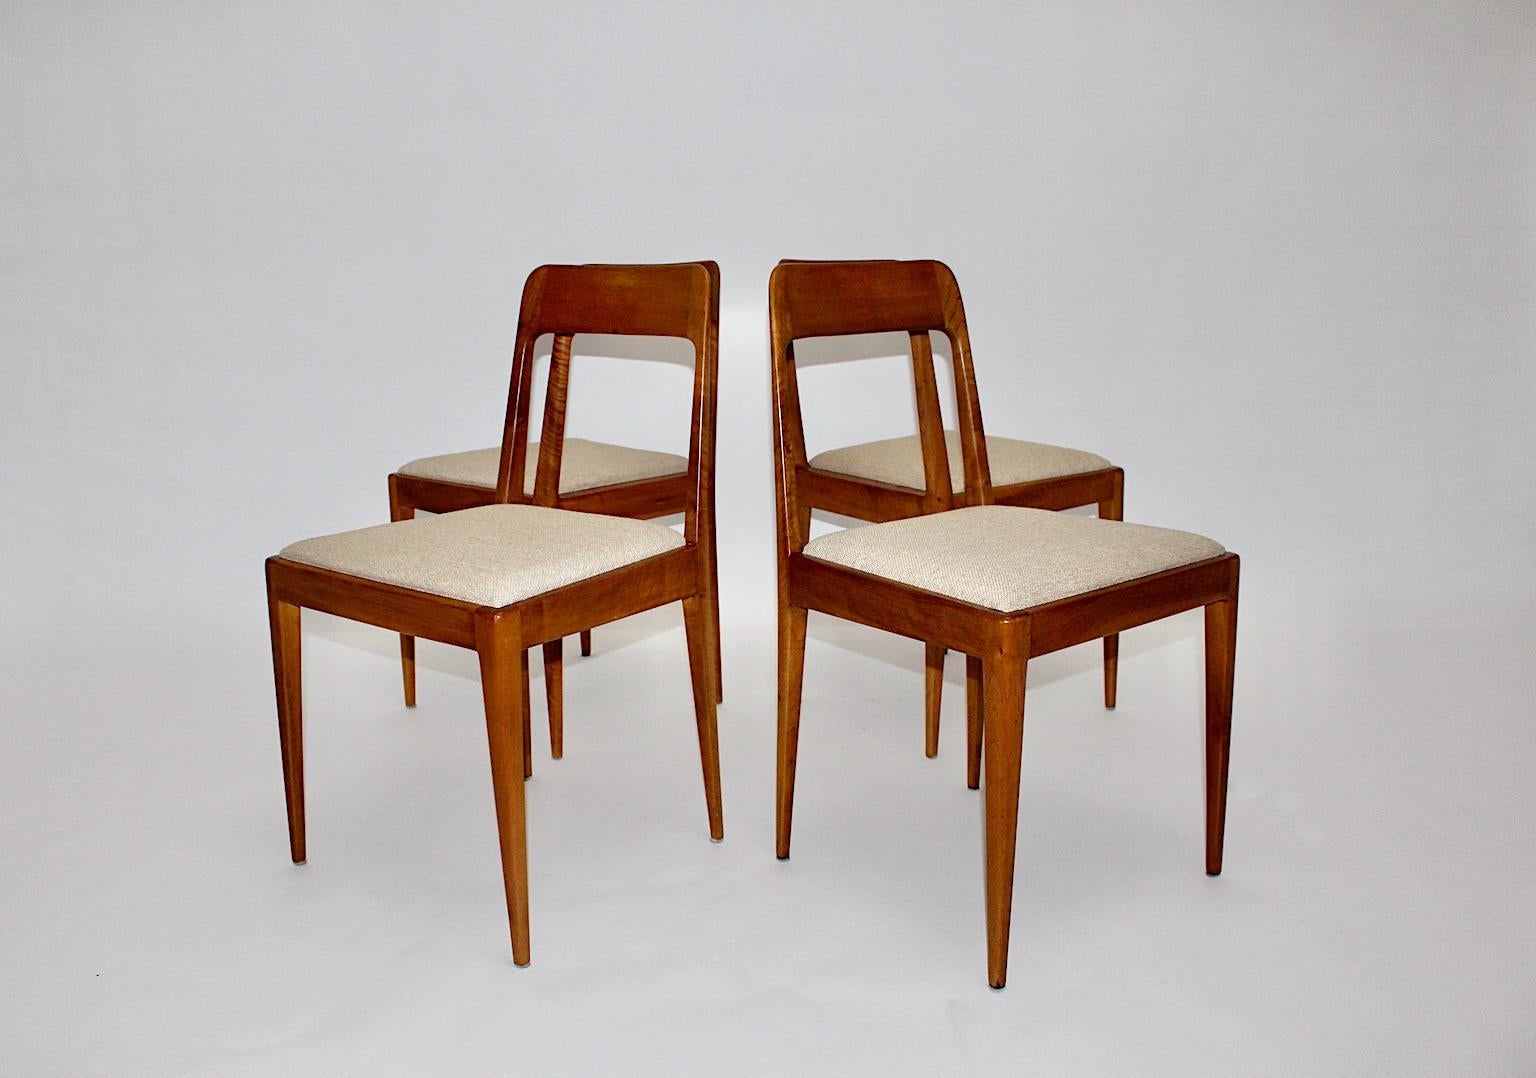 Mid-Century Modern vintage authentic four ( 4 ) dining chairs model A7 from solid walnut by Werkstätte Carl Auböck und Robert Nessler, 1950s Vienna.
A wonderful set of four dining chairs or chairs by Werkstätte Carl Auböck und Robert Nessler from